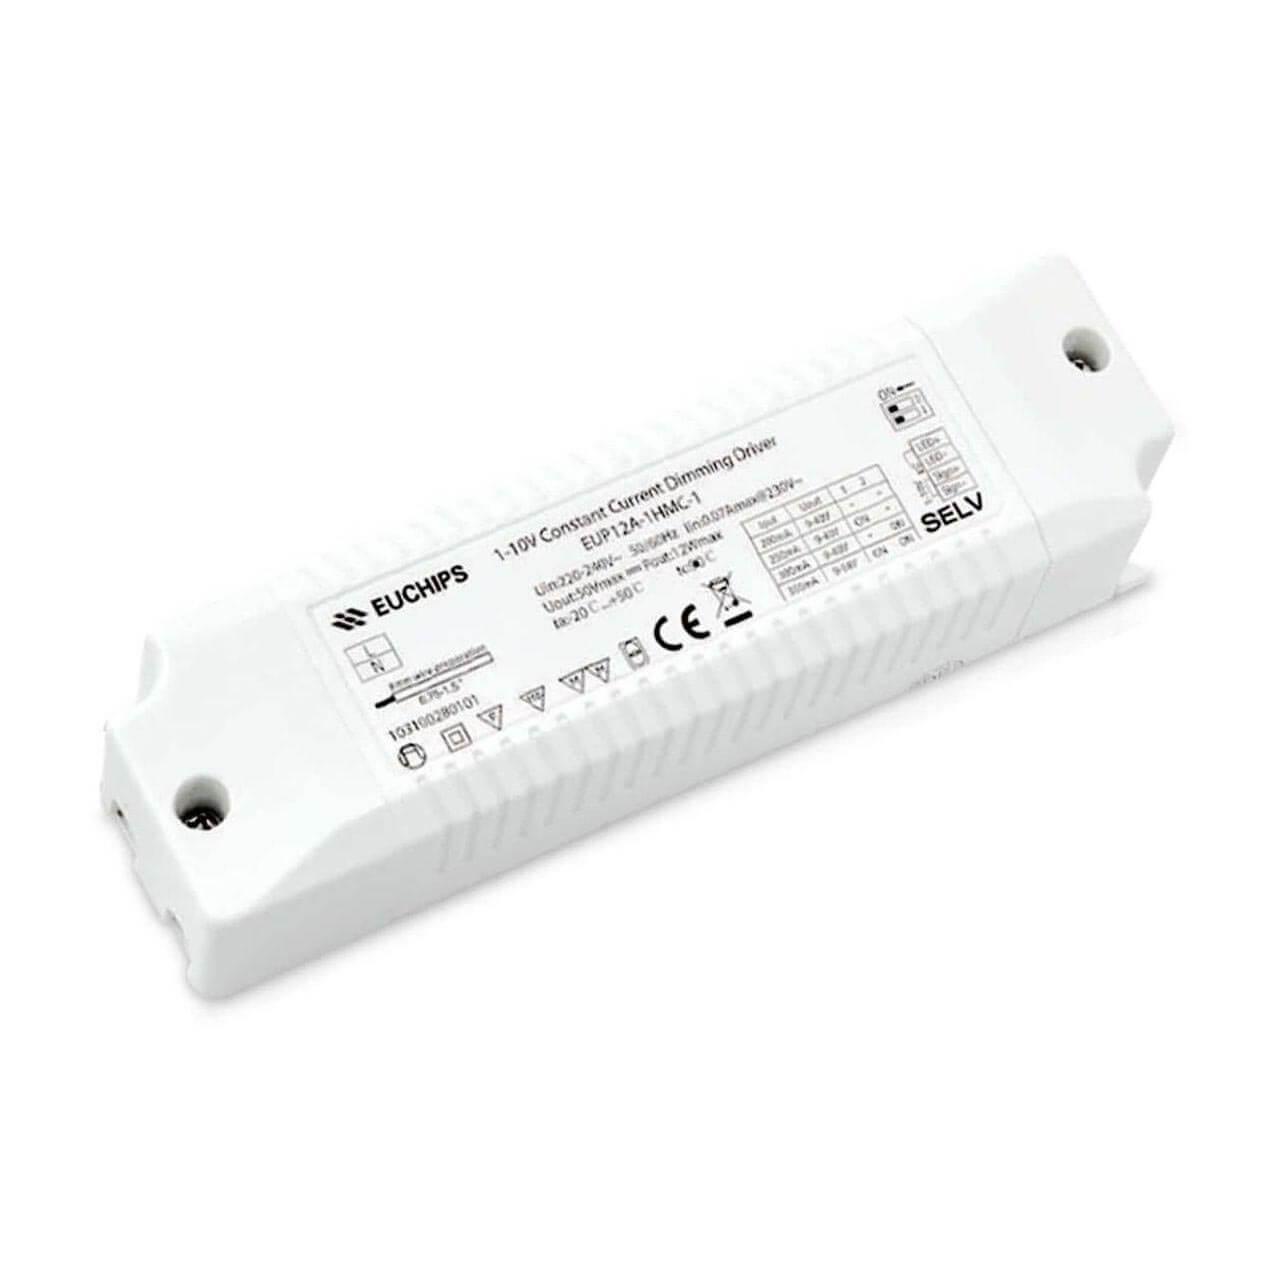  Ideal Lux Basic Driver 1-10V 15W 218830